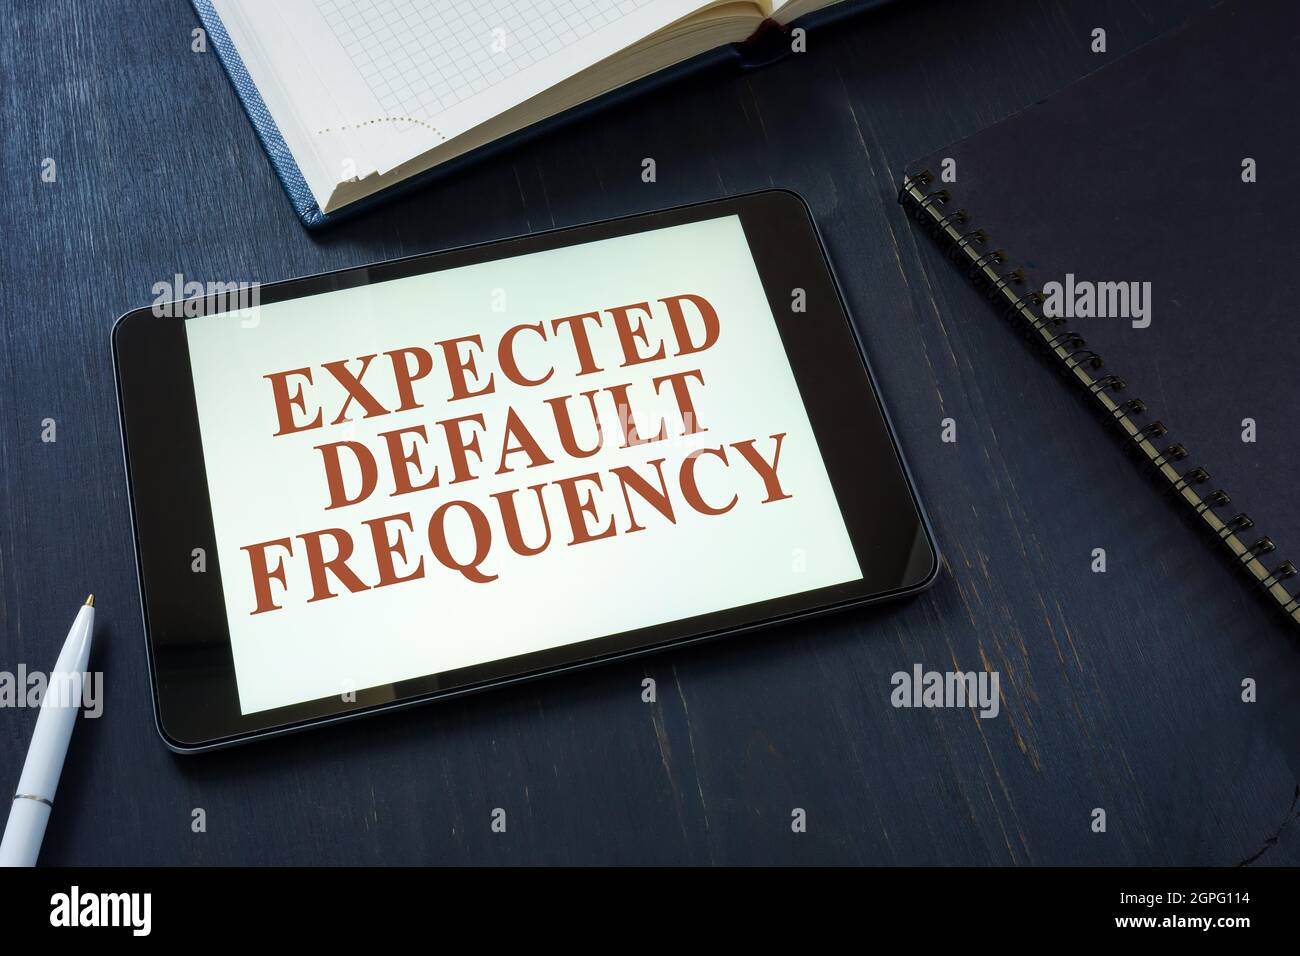 EDF expected default frequency on the tablet screen. Stock Photo